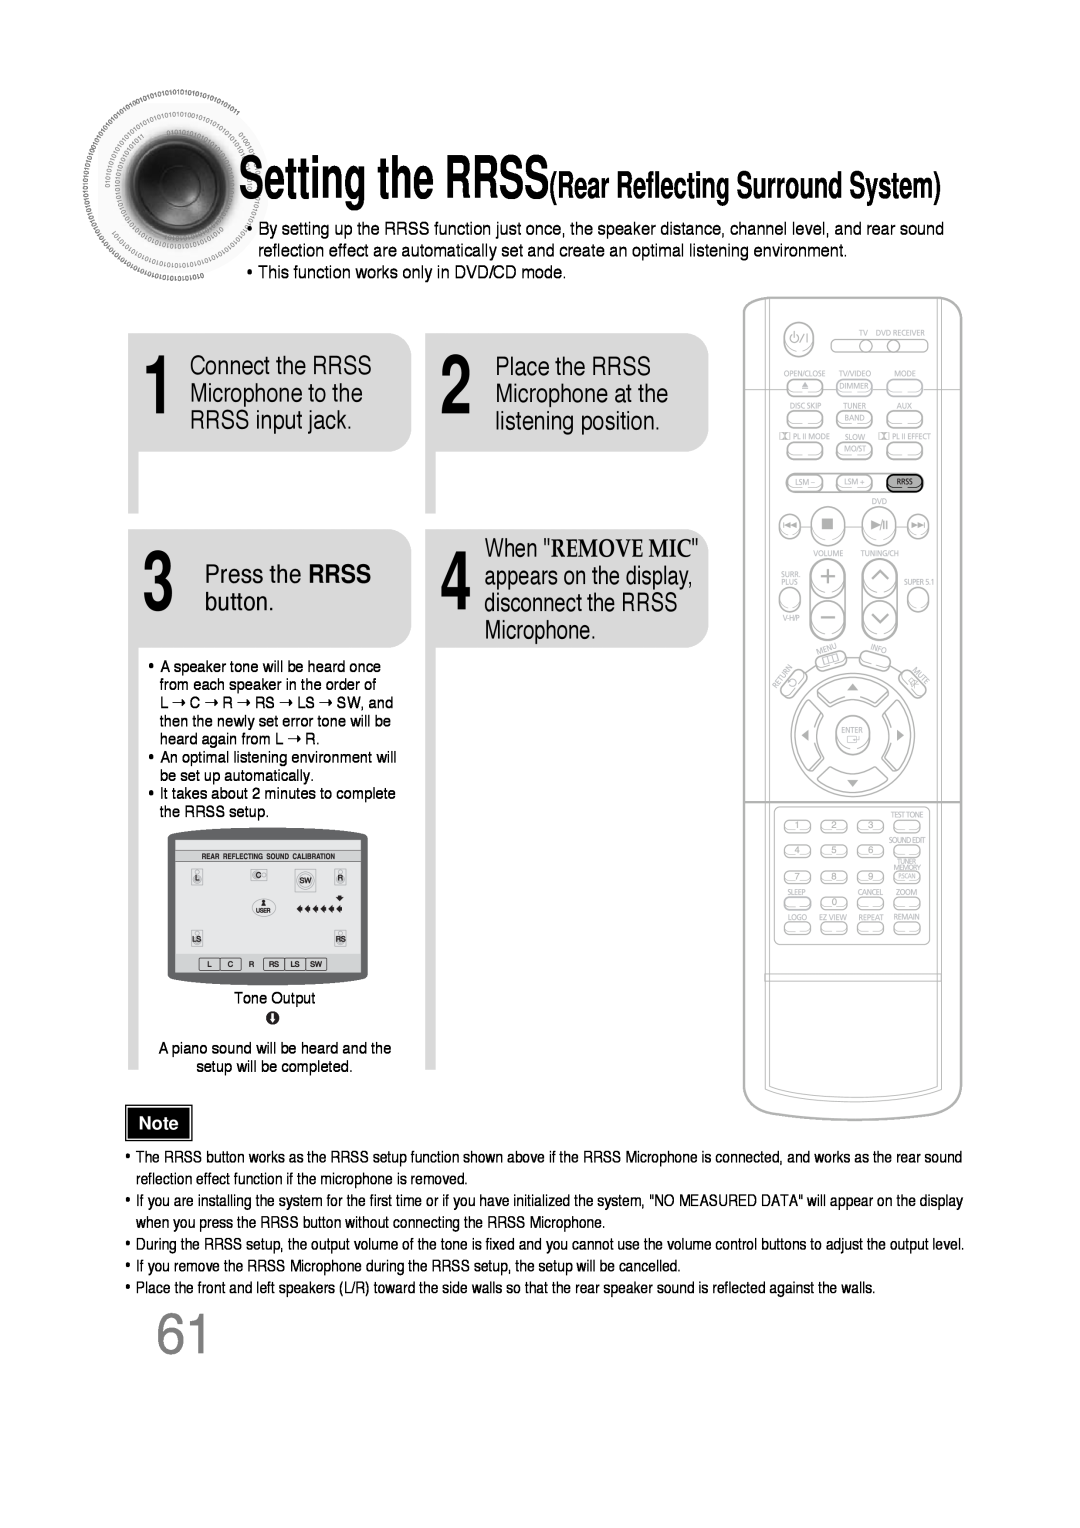 Samsung 20051111103302296 instruction manual Settingthe RRSSRear Reflecting Surround System, button, When REMOVE MIC 